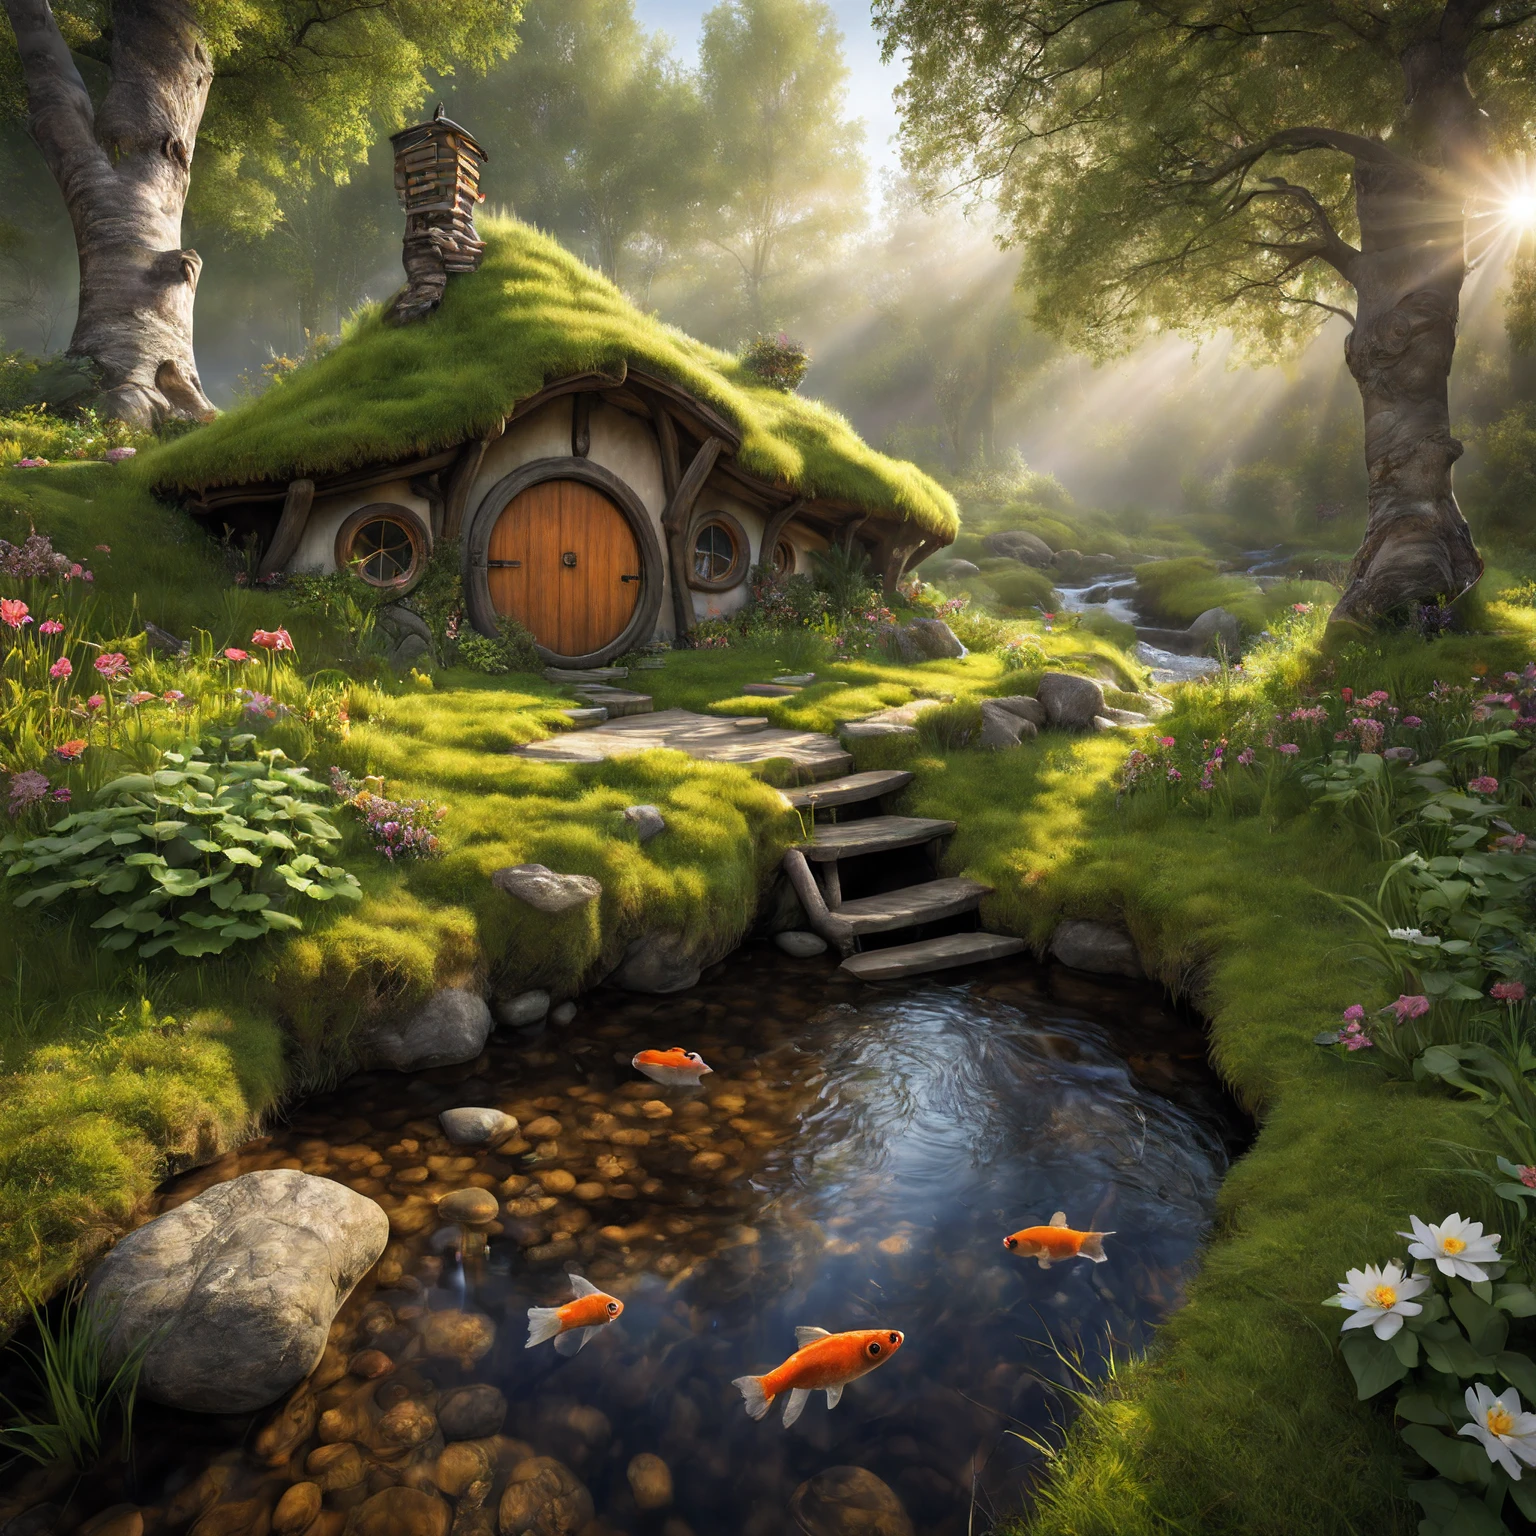 Raw photo, 8k uhd, dslr, photo-realistic, hyperrealism, 8k resolution, hdr, highly detailed, ultra detailed. 
The house of the hobbit in the birch grove near the stream. 
(The dwarf catches fish). 
Moss, a little morning fog, dawn, sunrise, rays of light through the leaves of trees, flowers on the grass, bright little butterflies, frogs in the water of the stream.